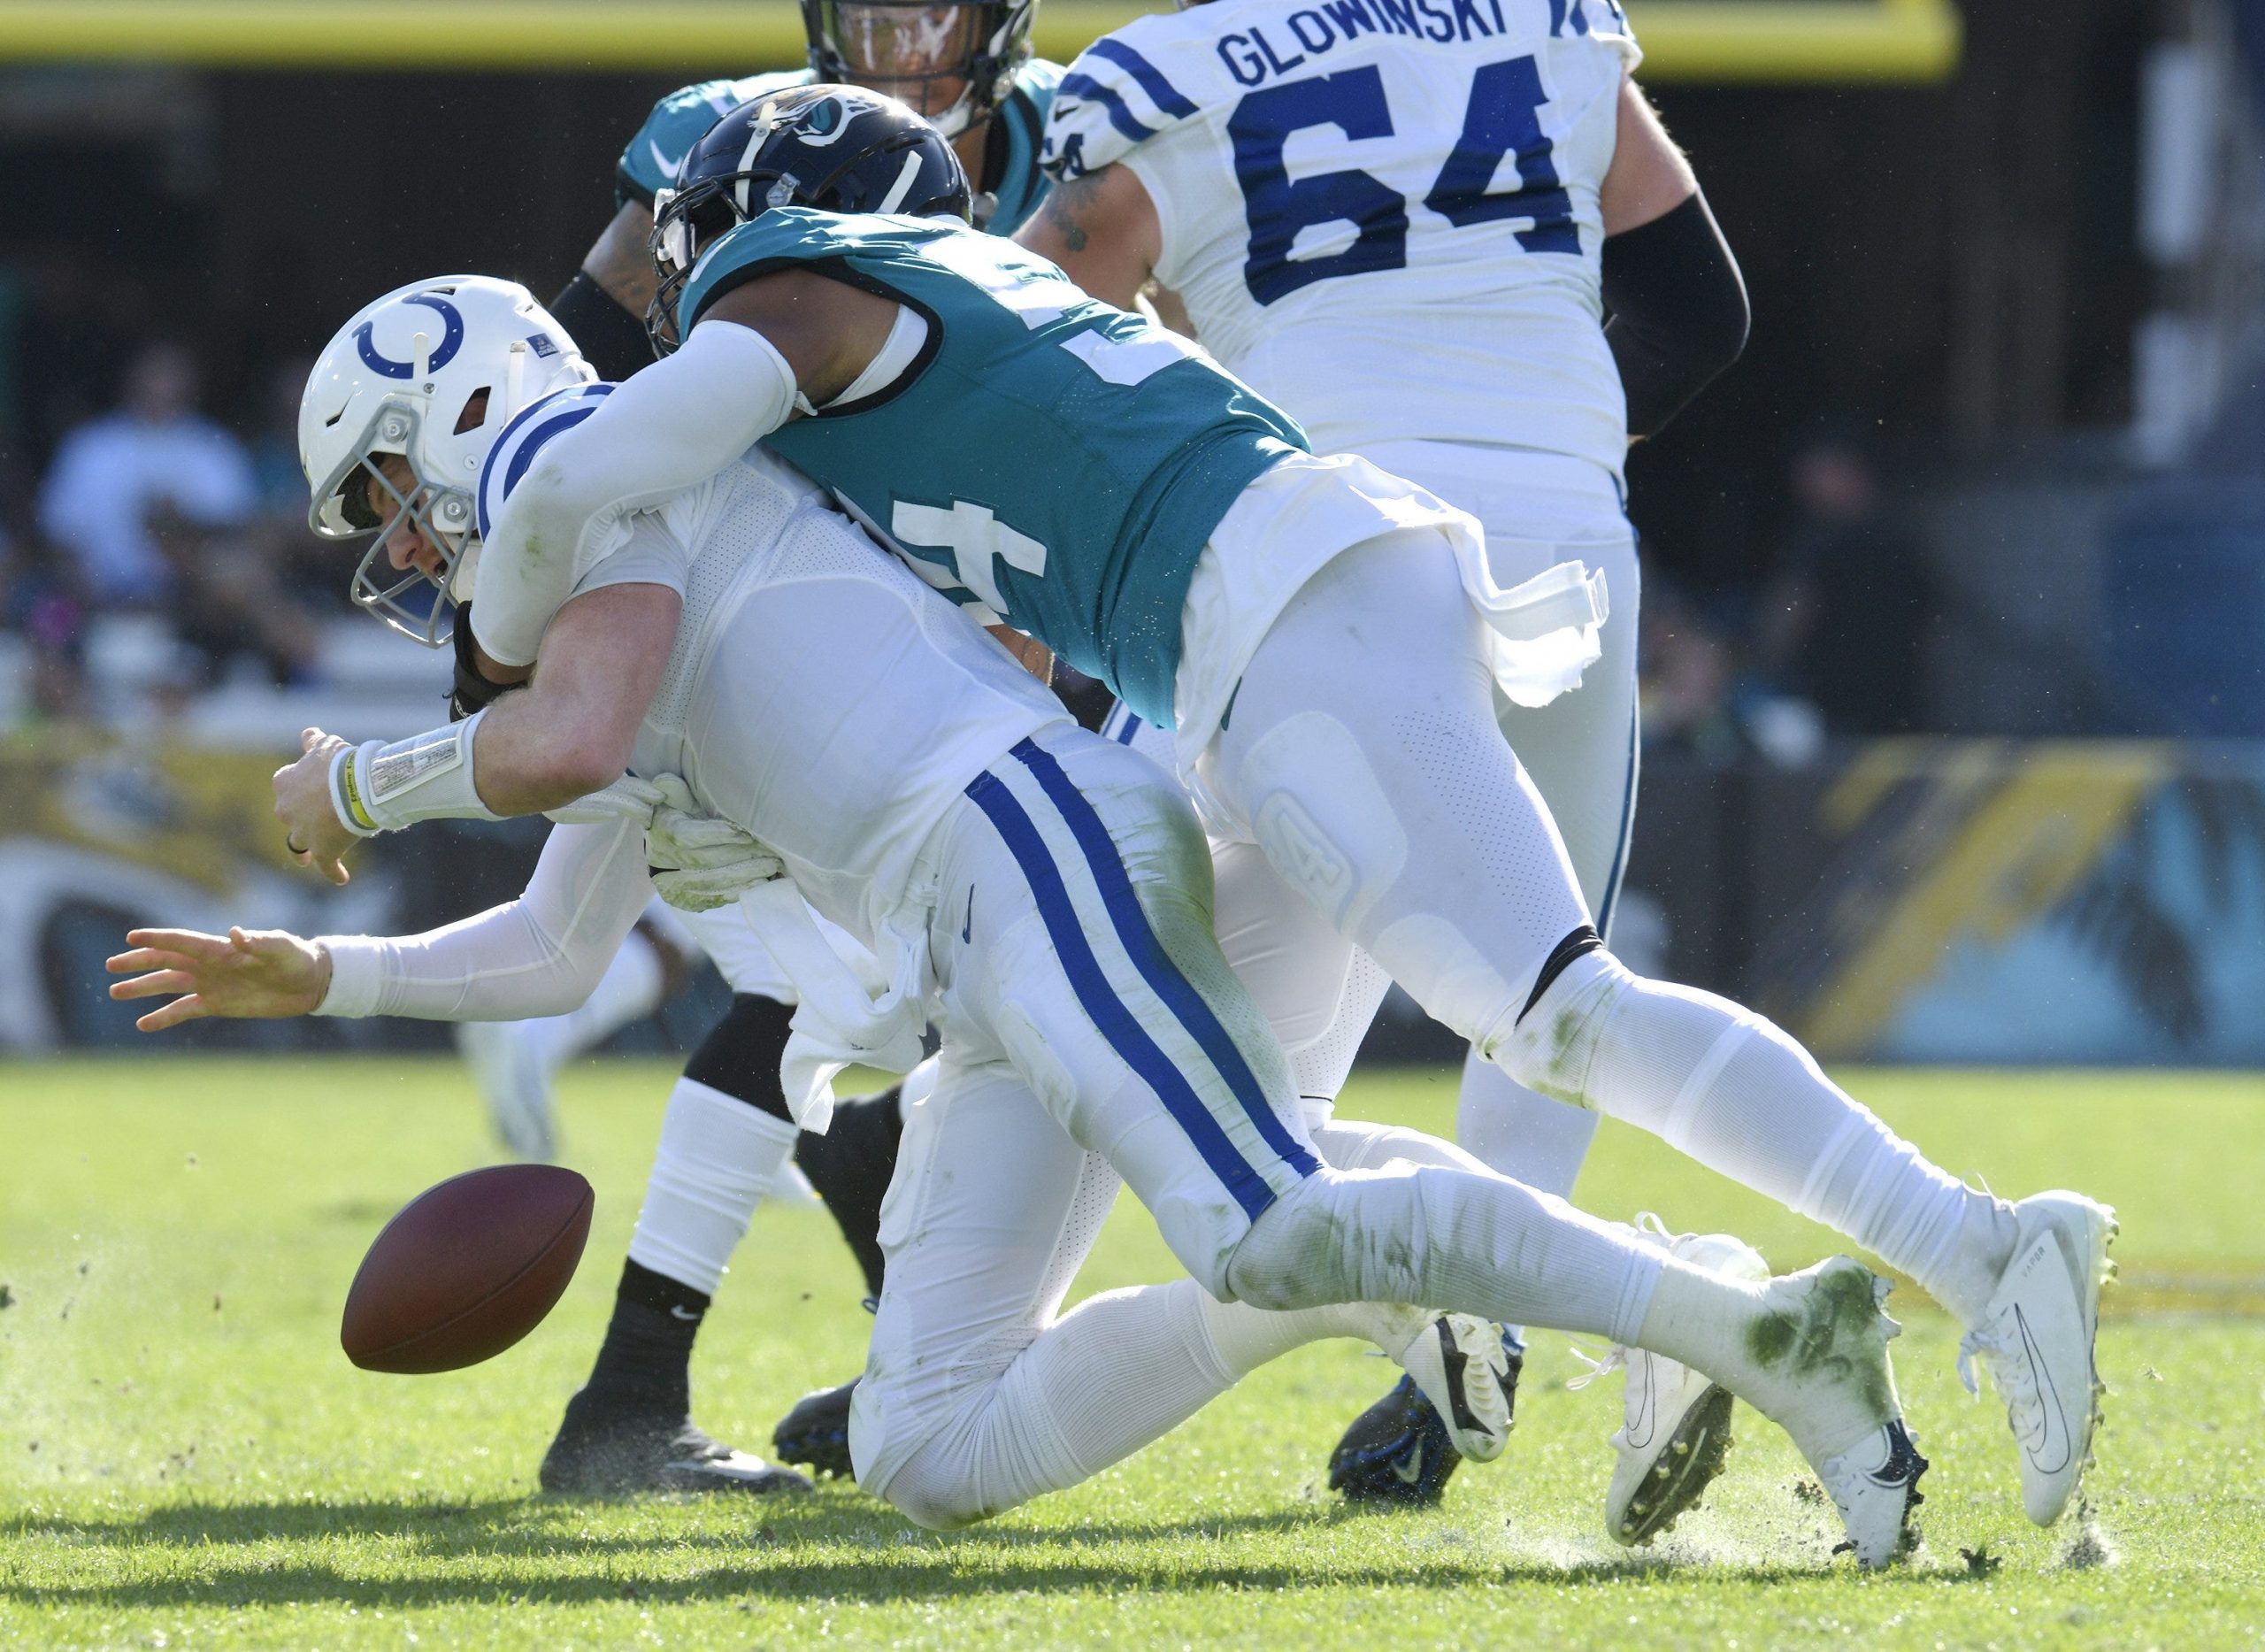 Jacksonville Jaguars middle linebacker Damien Wilson (54) forces a fumble during a sack on Indianapolis Colts quarterback Carson Wentz (2) which the Jaguars recovered during early third quarter action